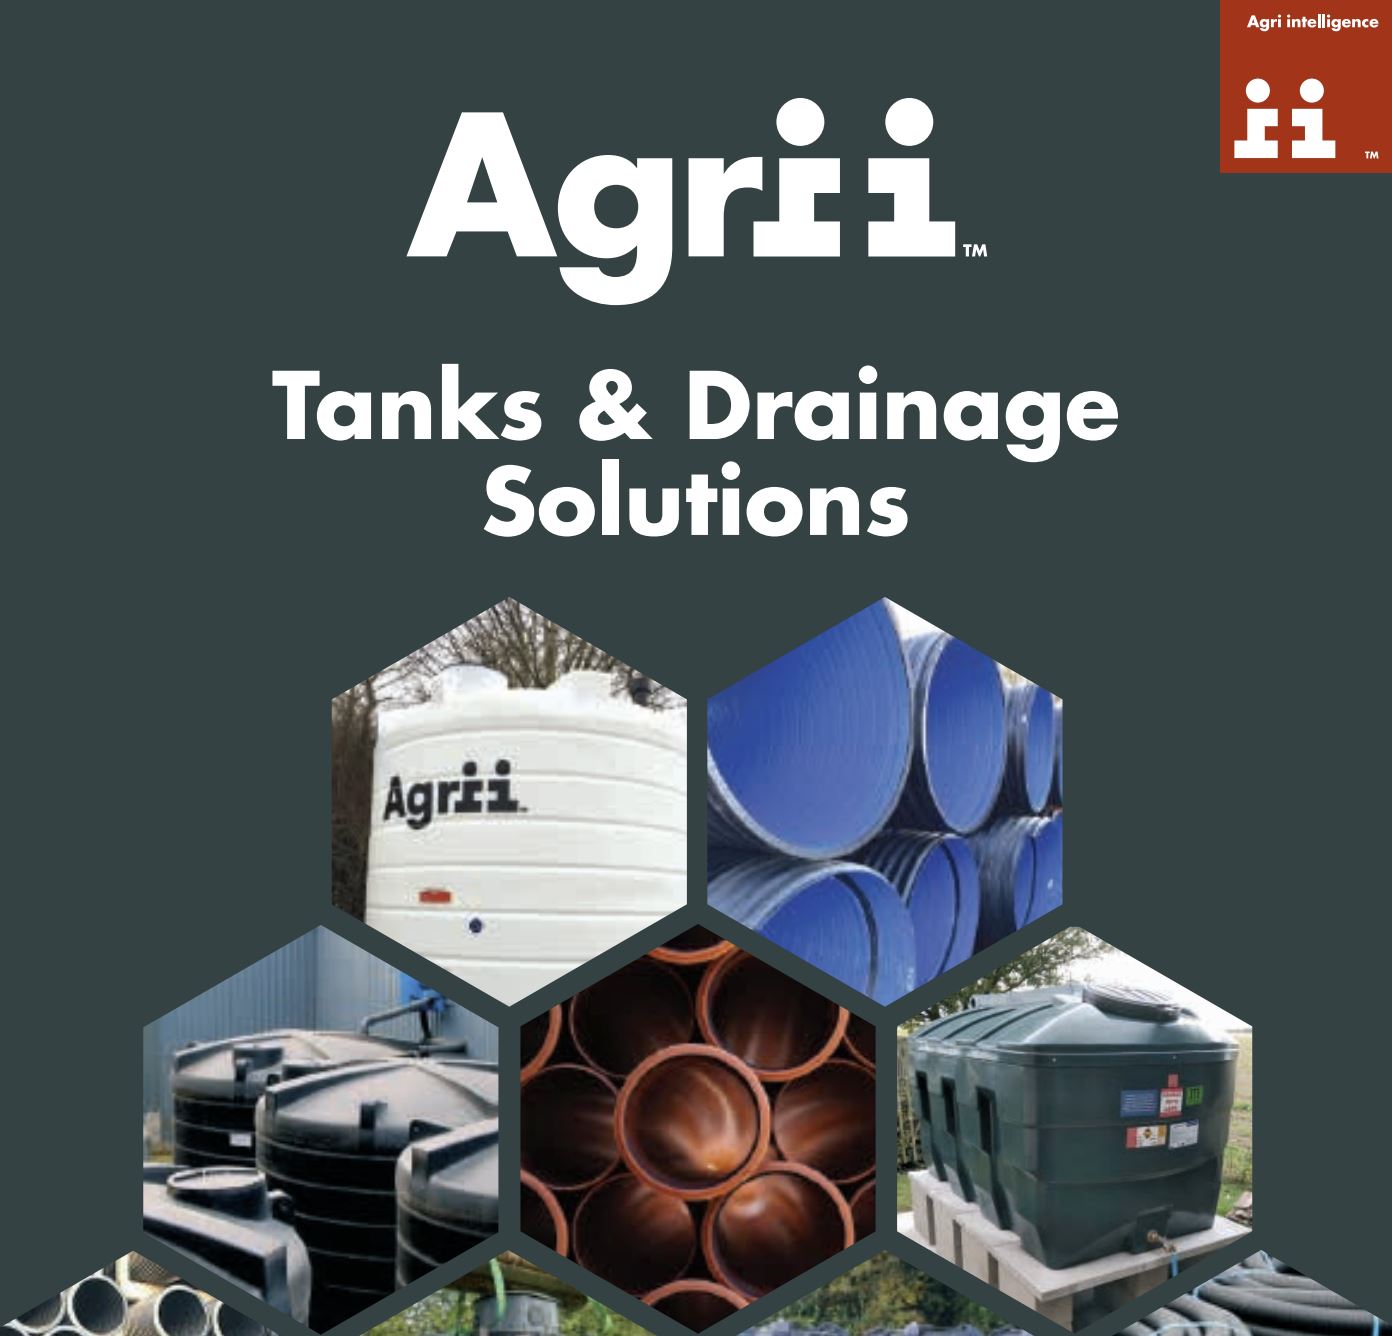 Agrii fuel and water storage tanks and land drainage supplies